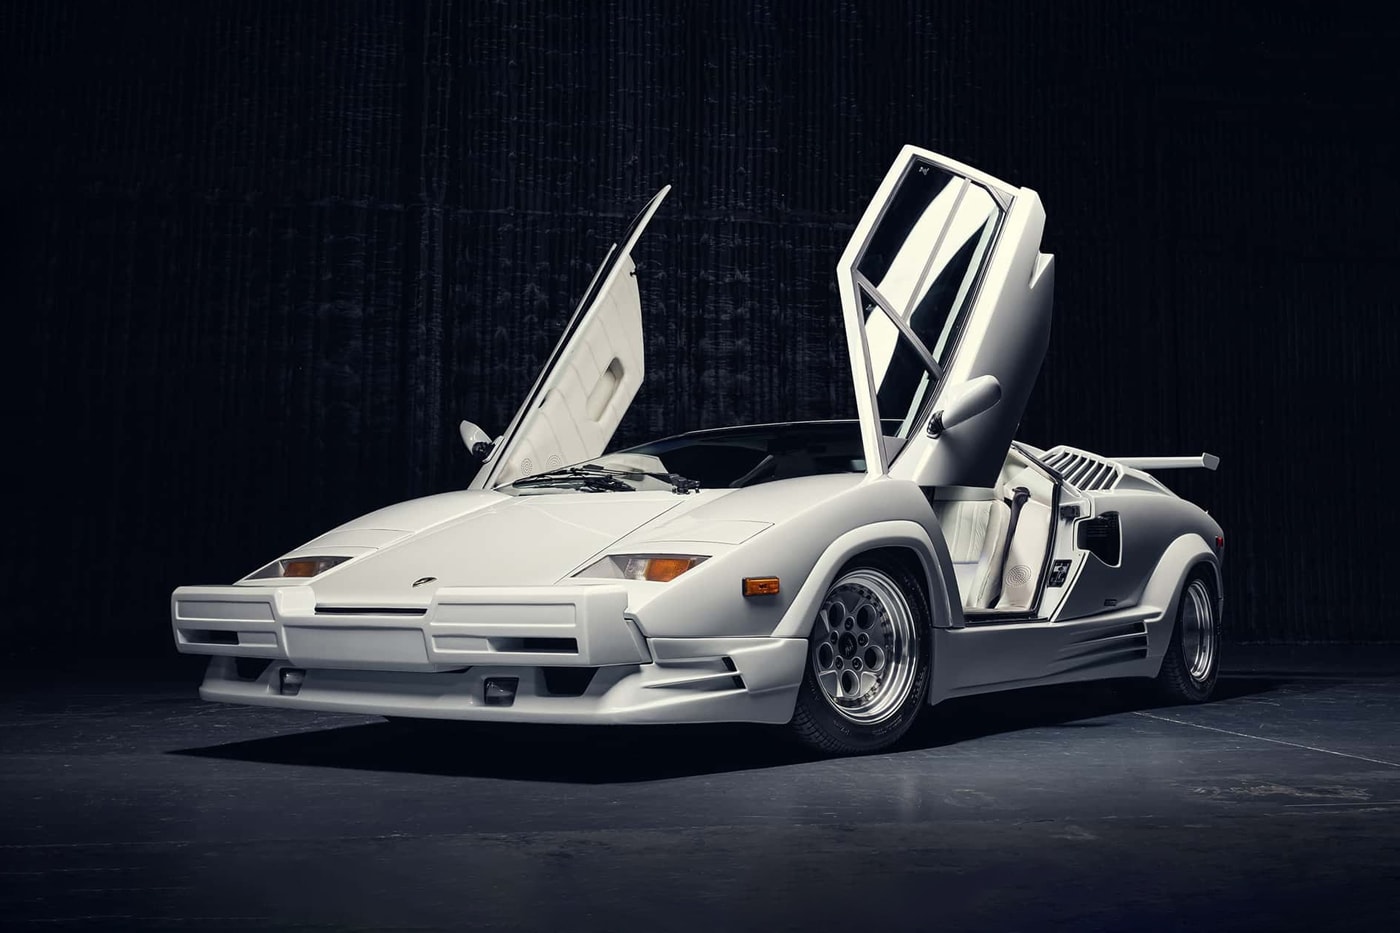  The Wolf of Wall Street Lamborghini Countach RM Sothebys Auction Info